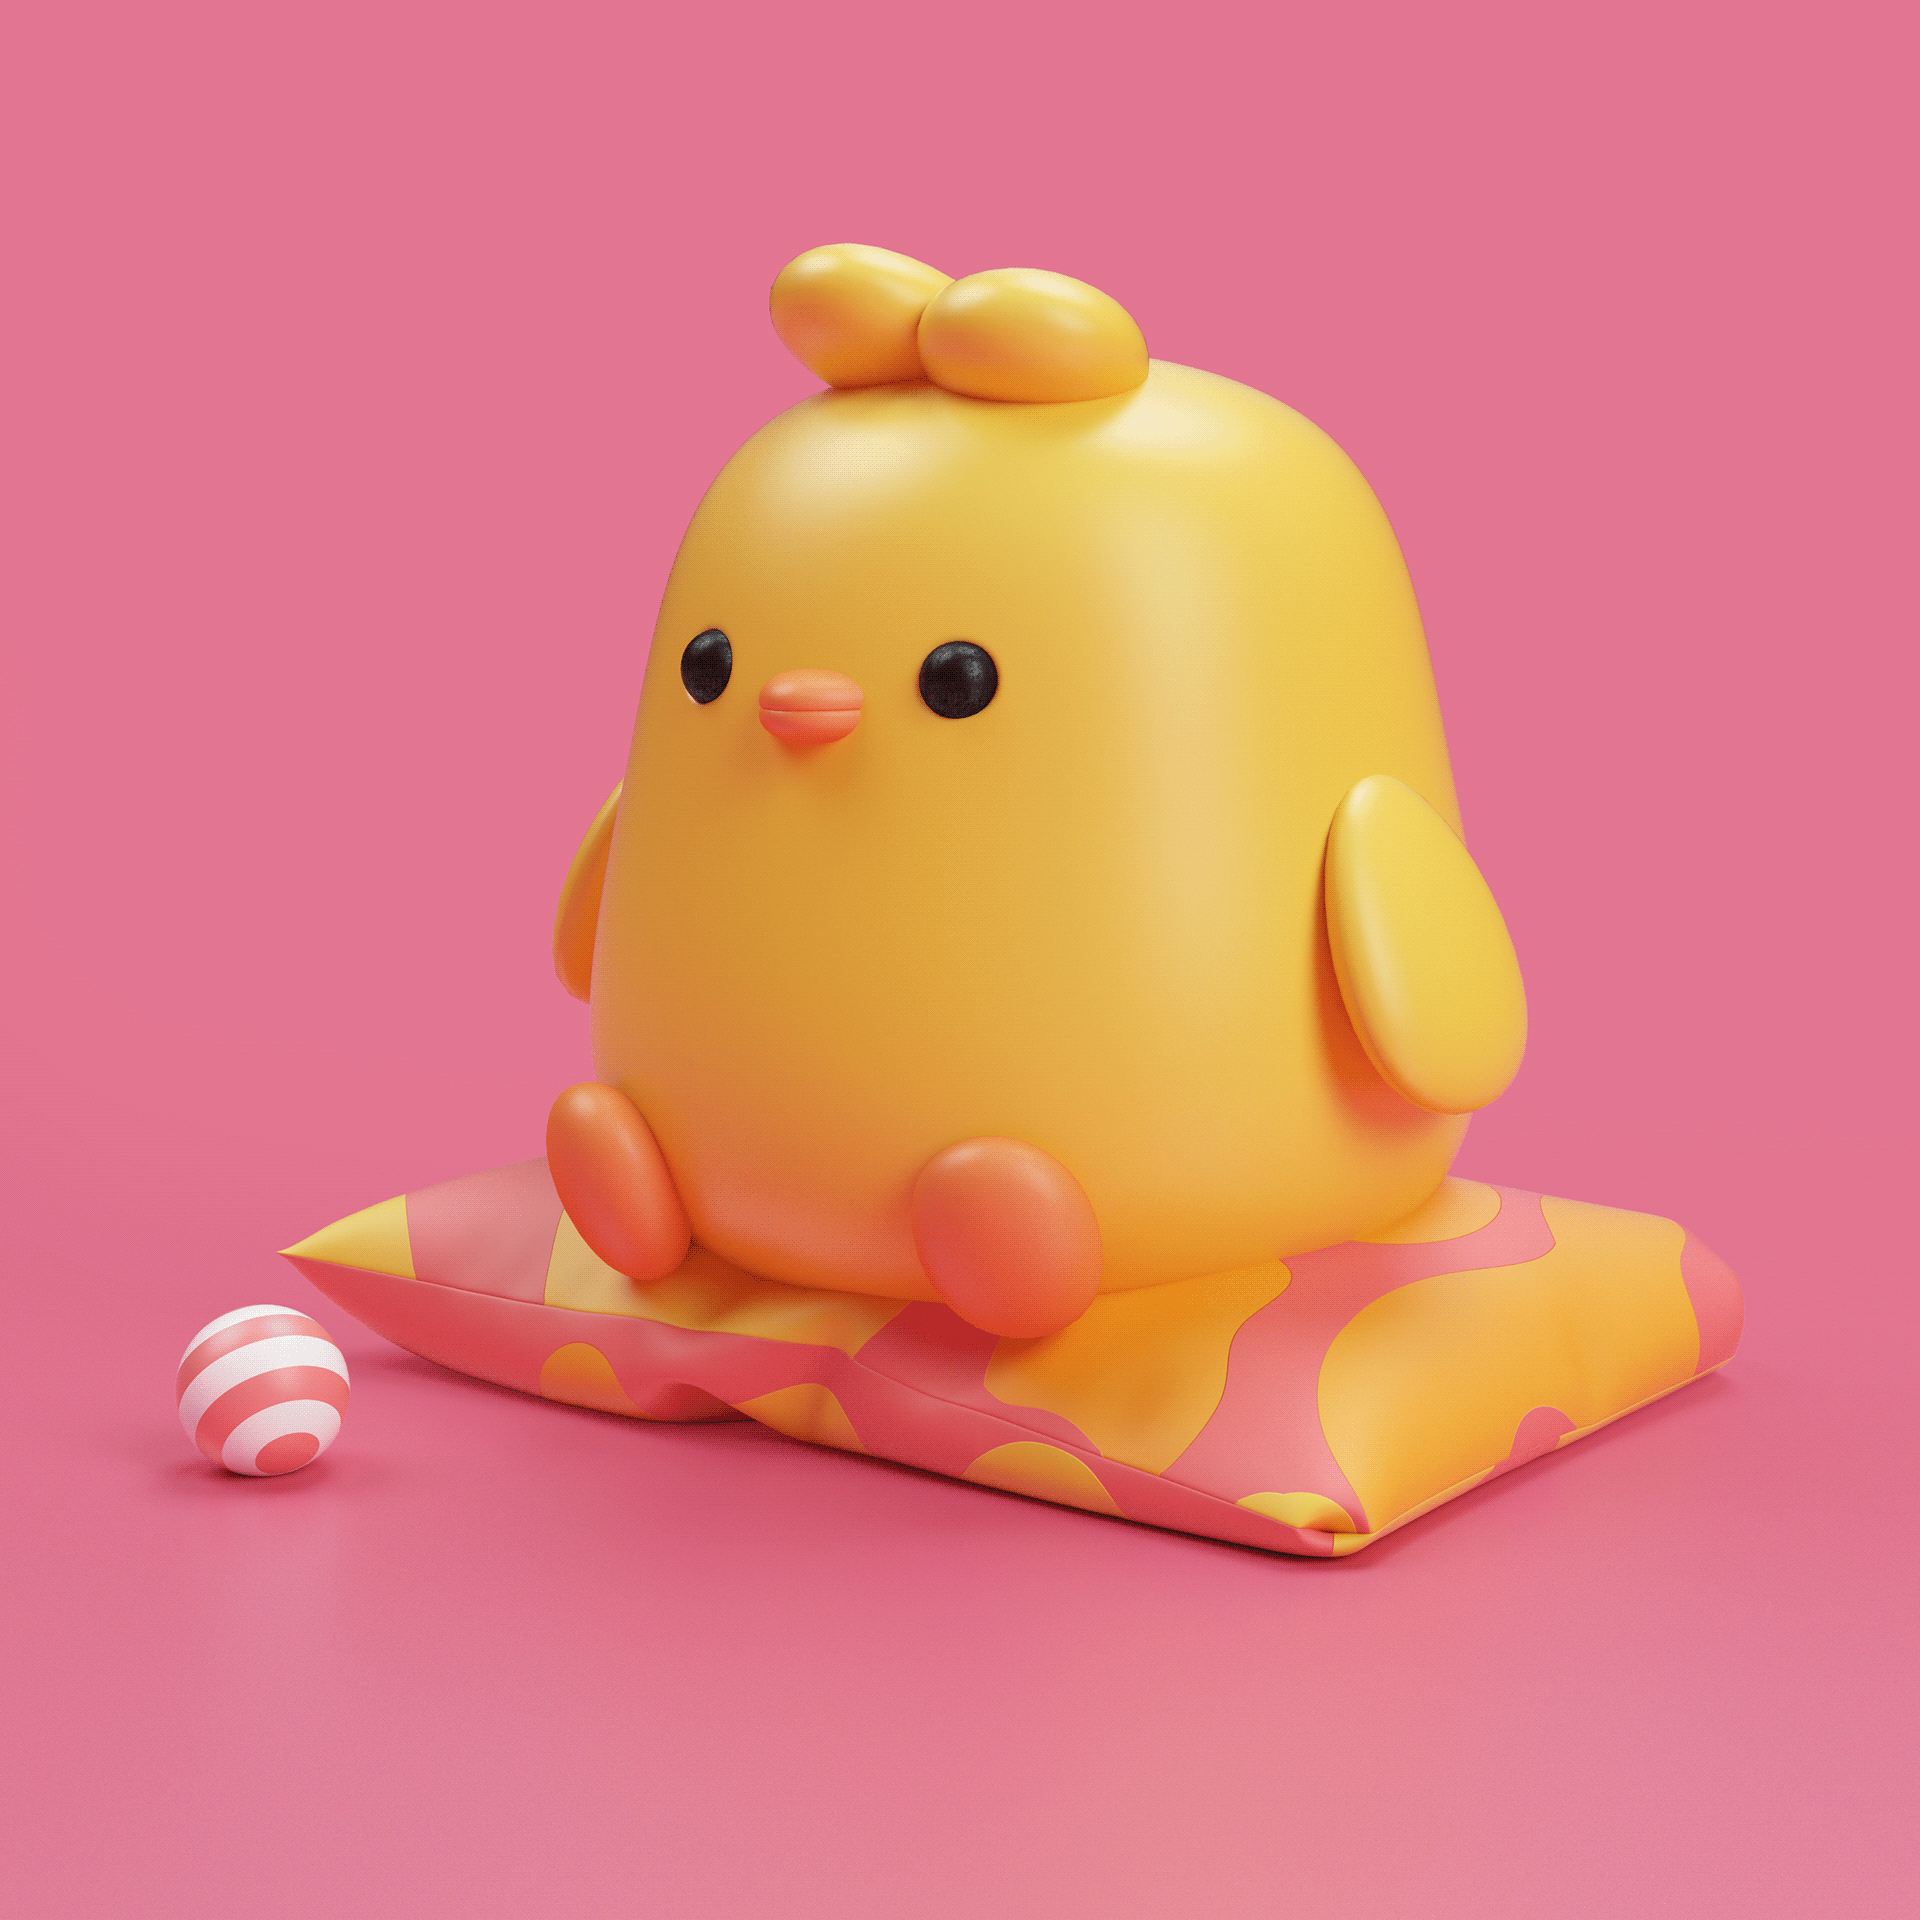 Collection | Art-Toy on Behance39774a90282601.5e1387ca529ca.png